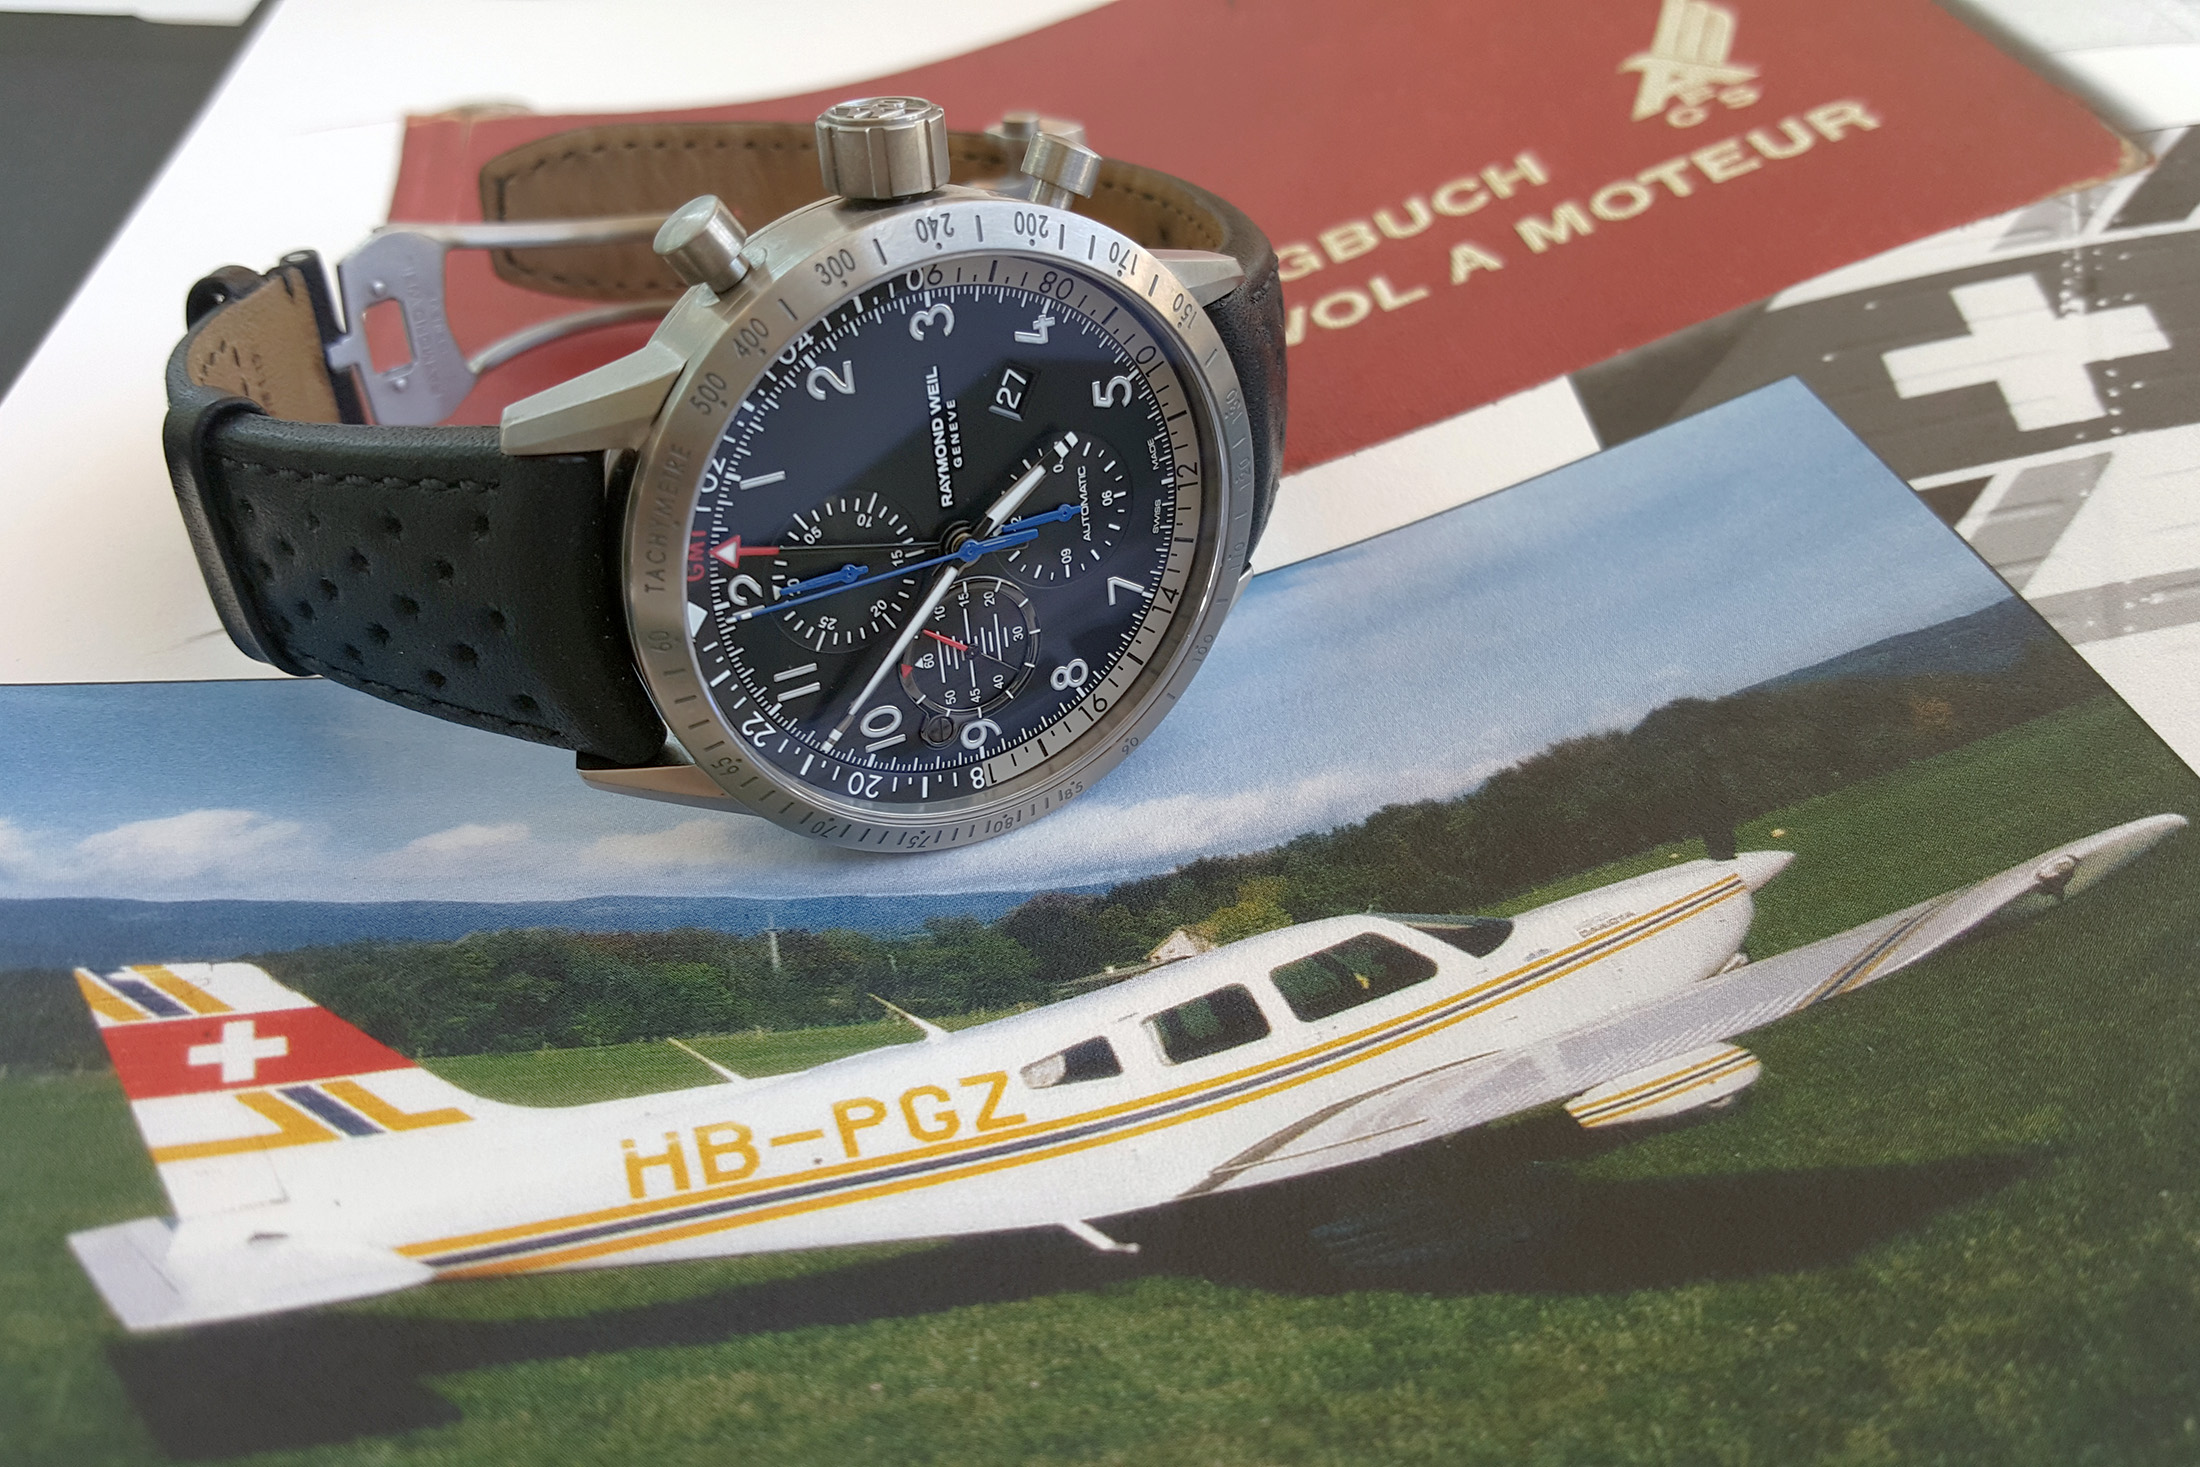 The new Freelancer Piper chronograph with a photograph of the plane that inspired its creation.